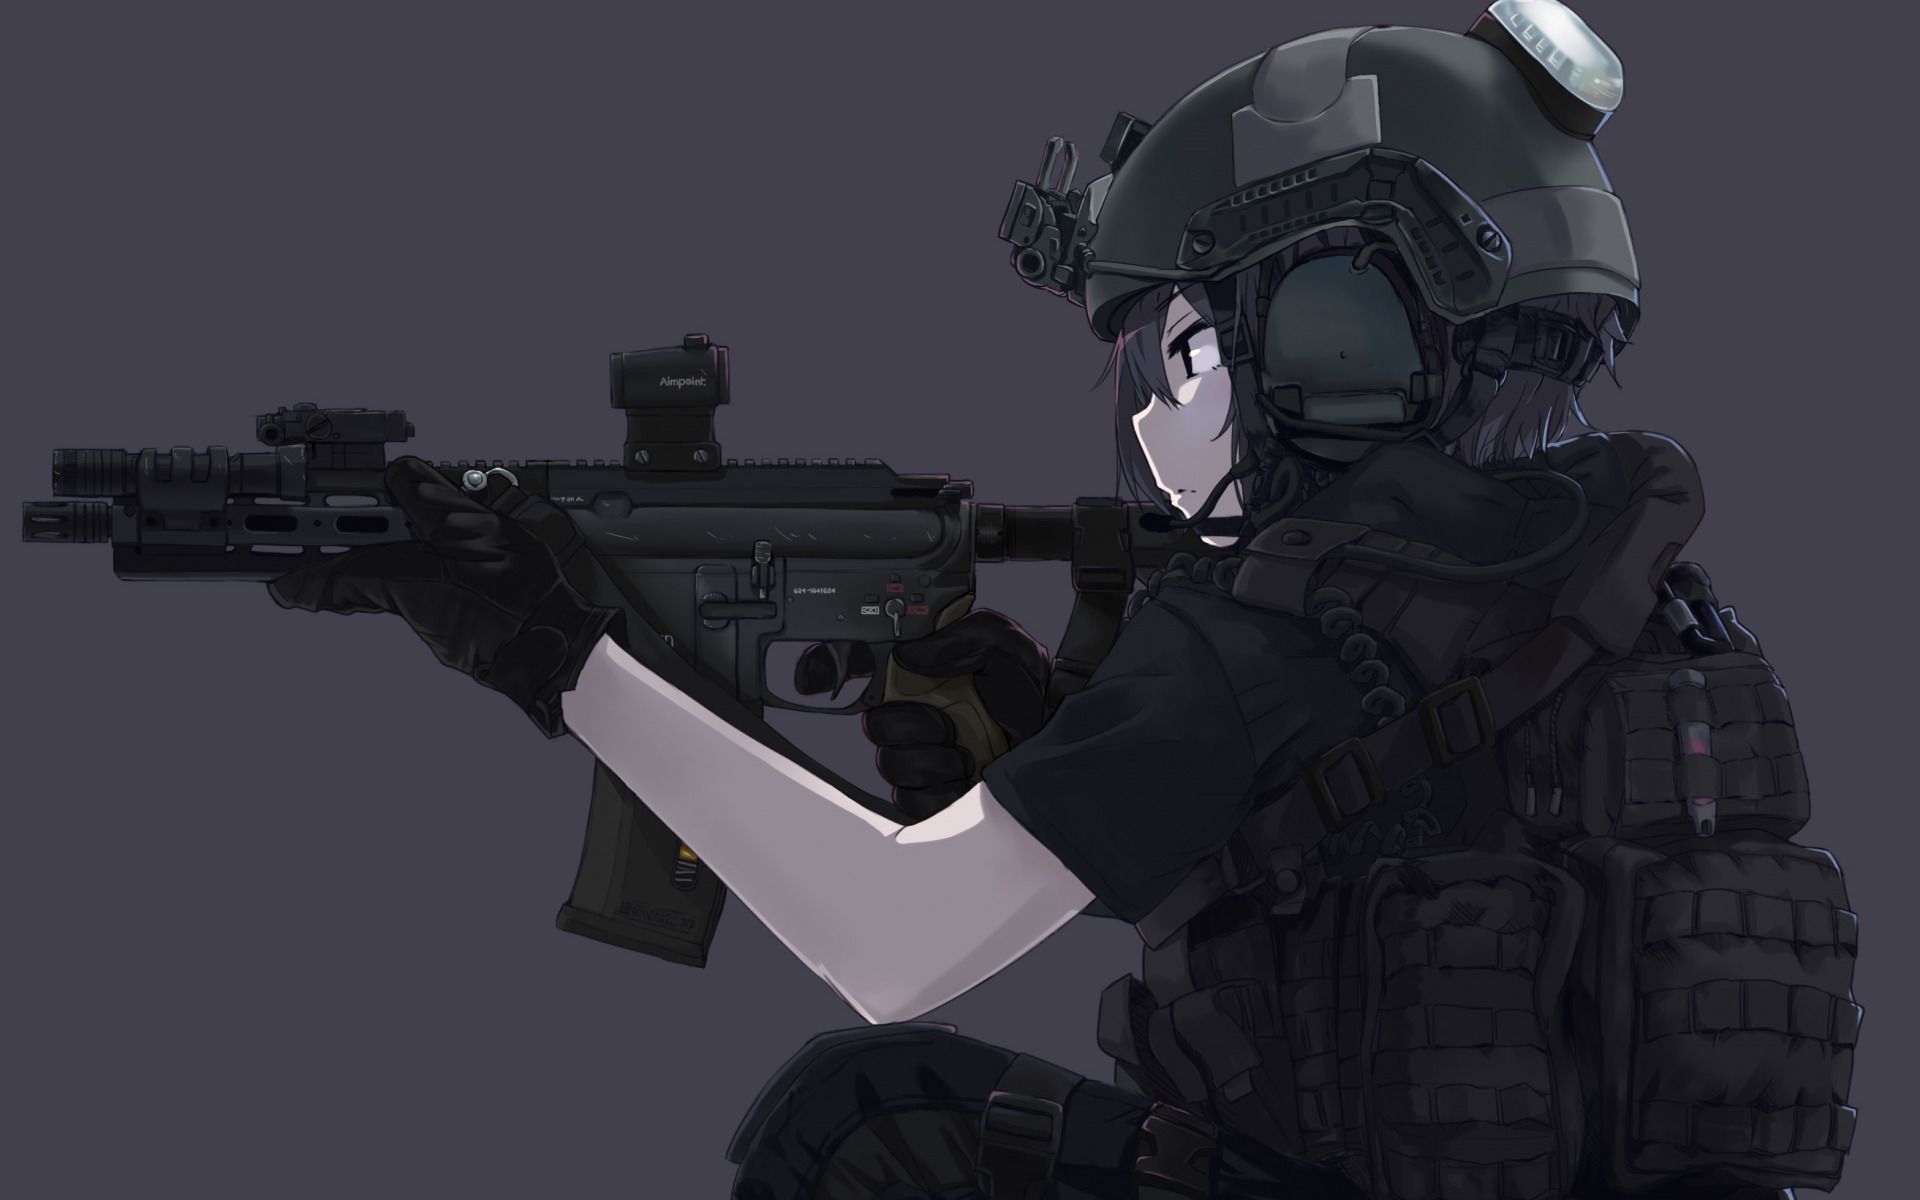 Download wallpaper girl, gun, soldier, military, weapon, anime, black ops, asian, rifle, japanese, gloves, pearls, oriental, asiatic, uniform, special forces, section other in resolution 1920x1200